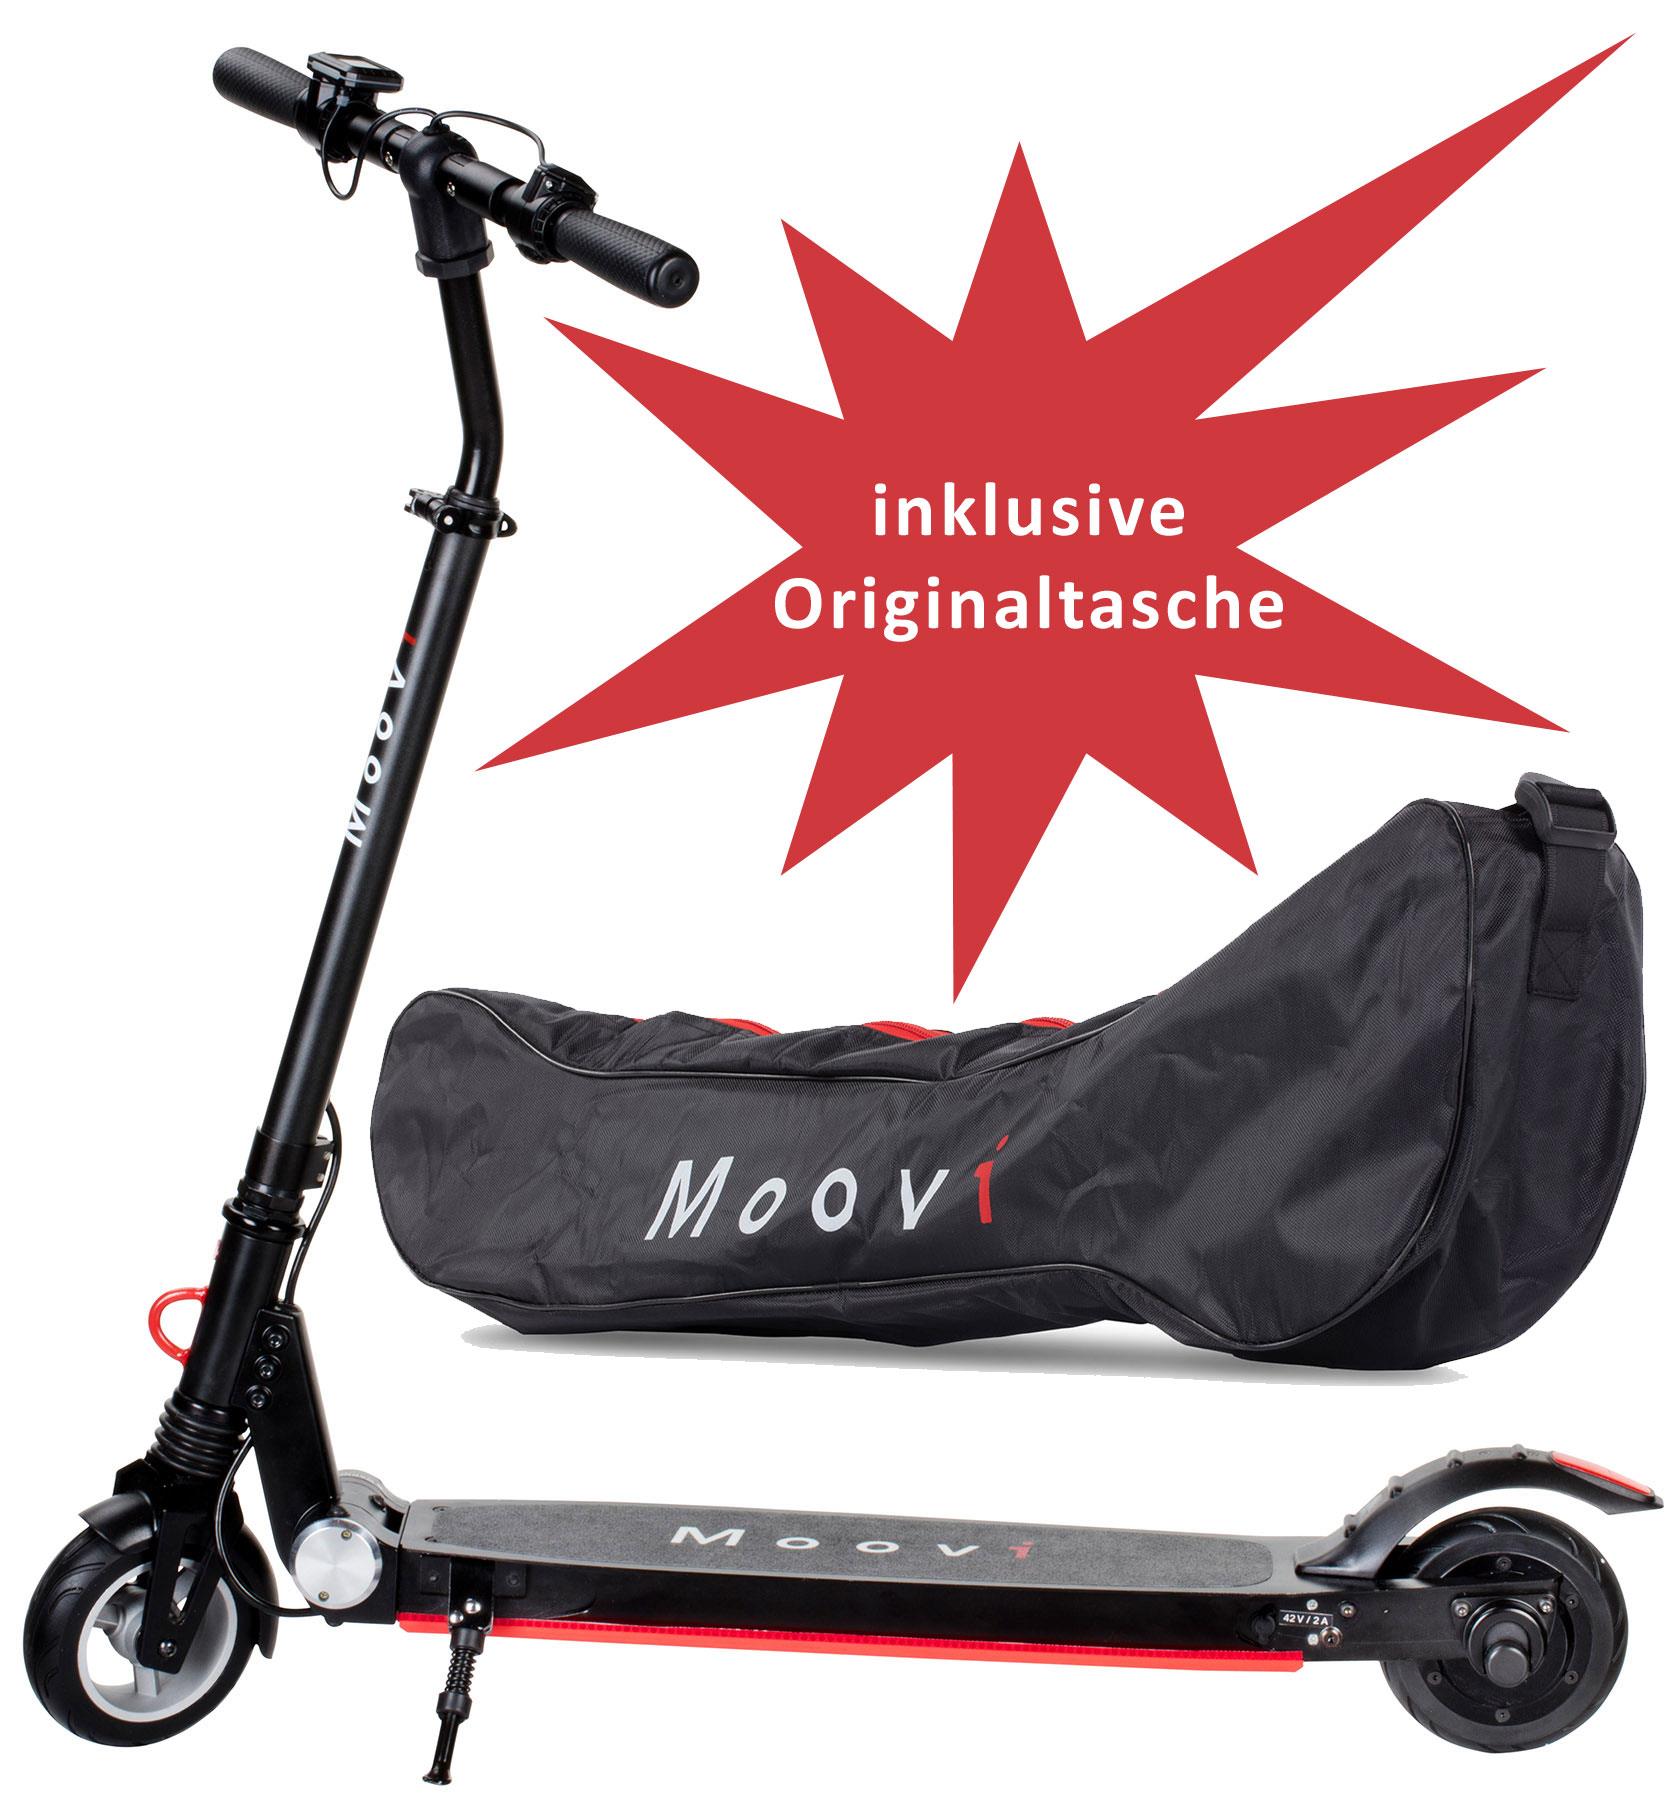 MOOVI Mini eScooter demo device / without registration in Germany